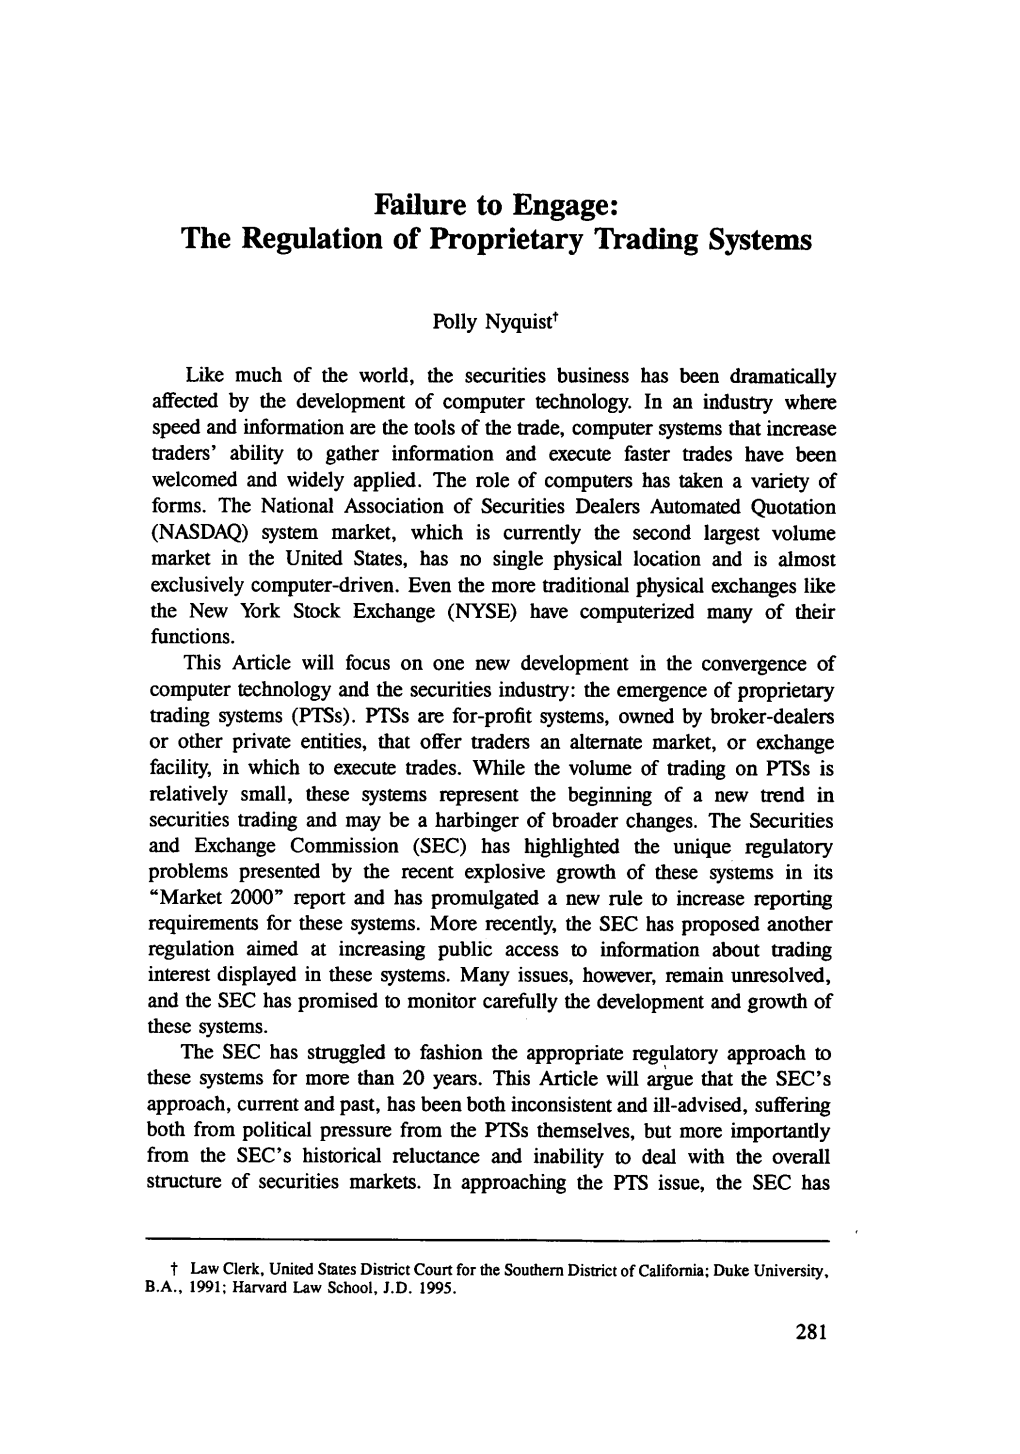 The Regulation of Proprietary Trading Systems